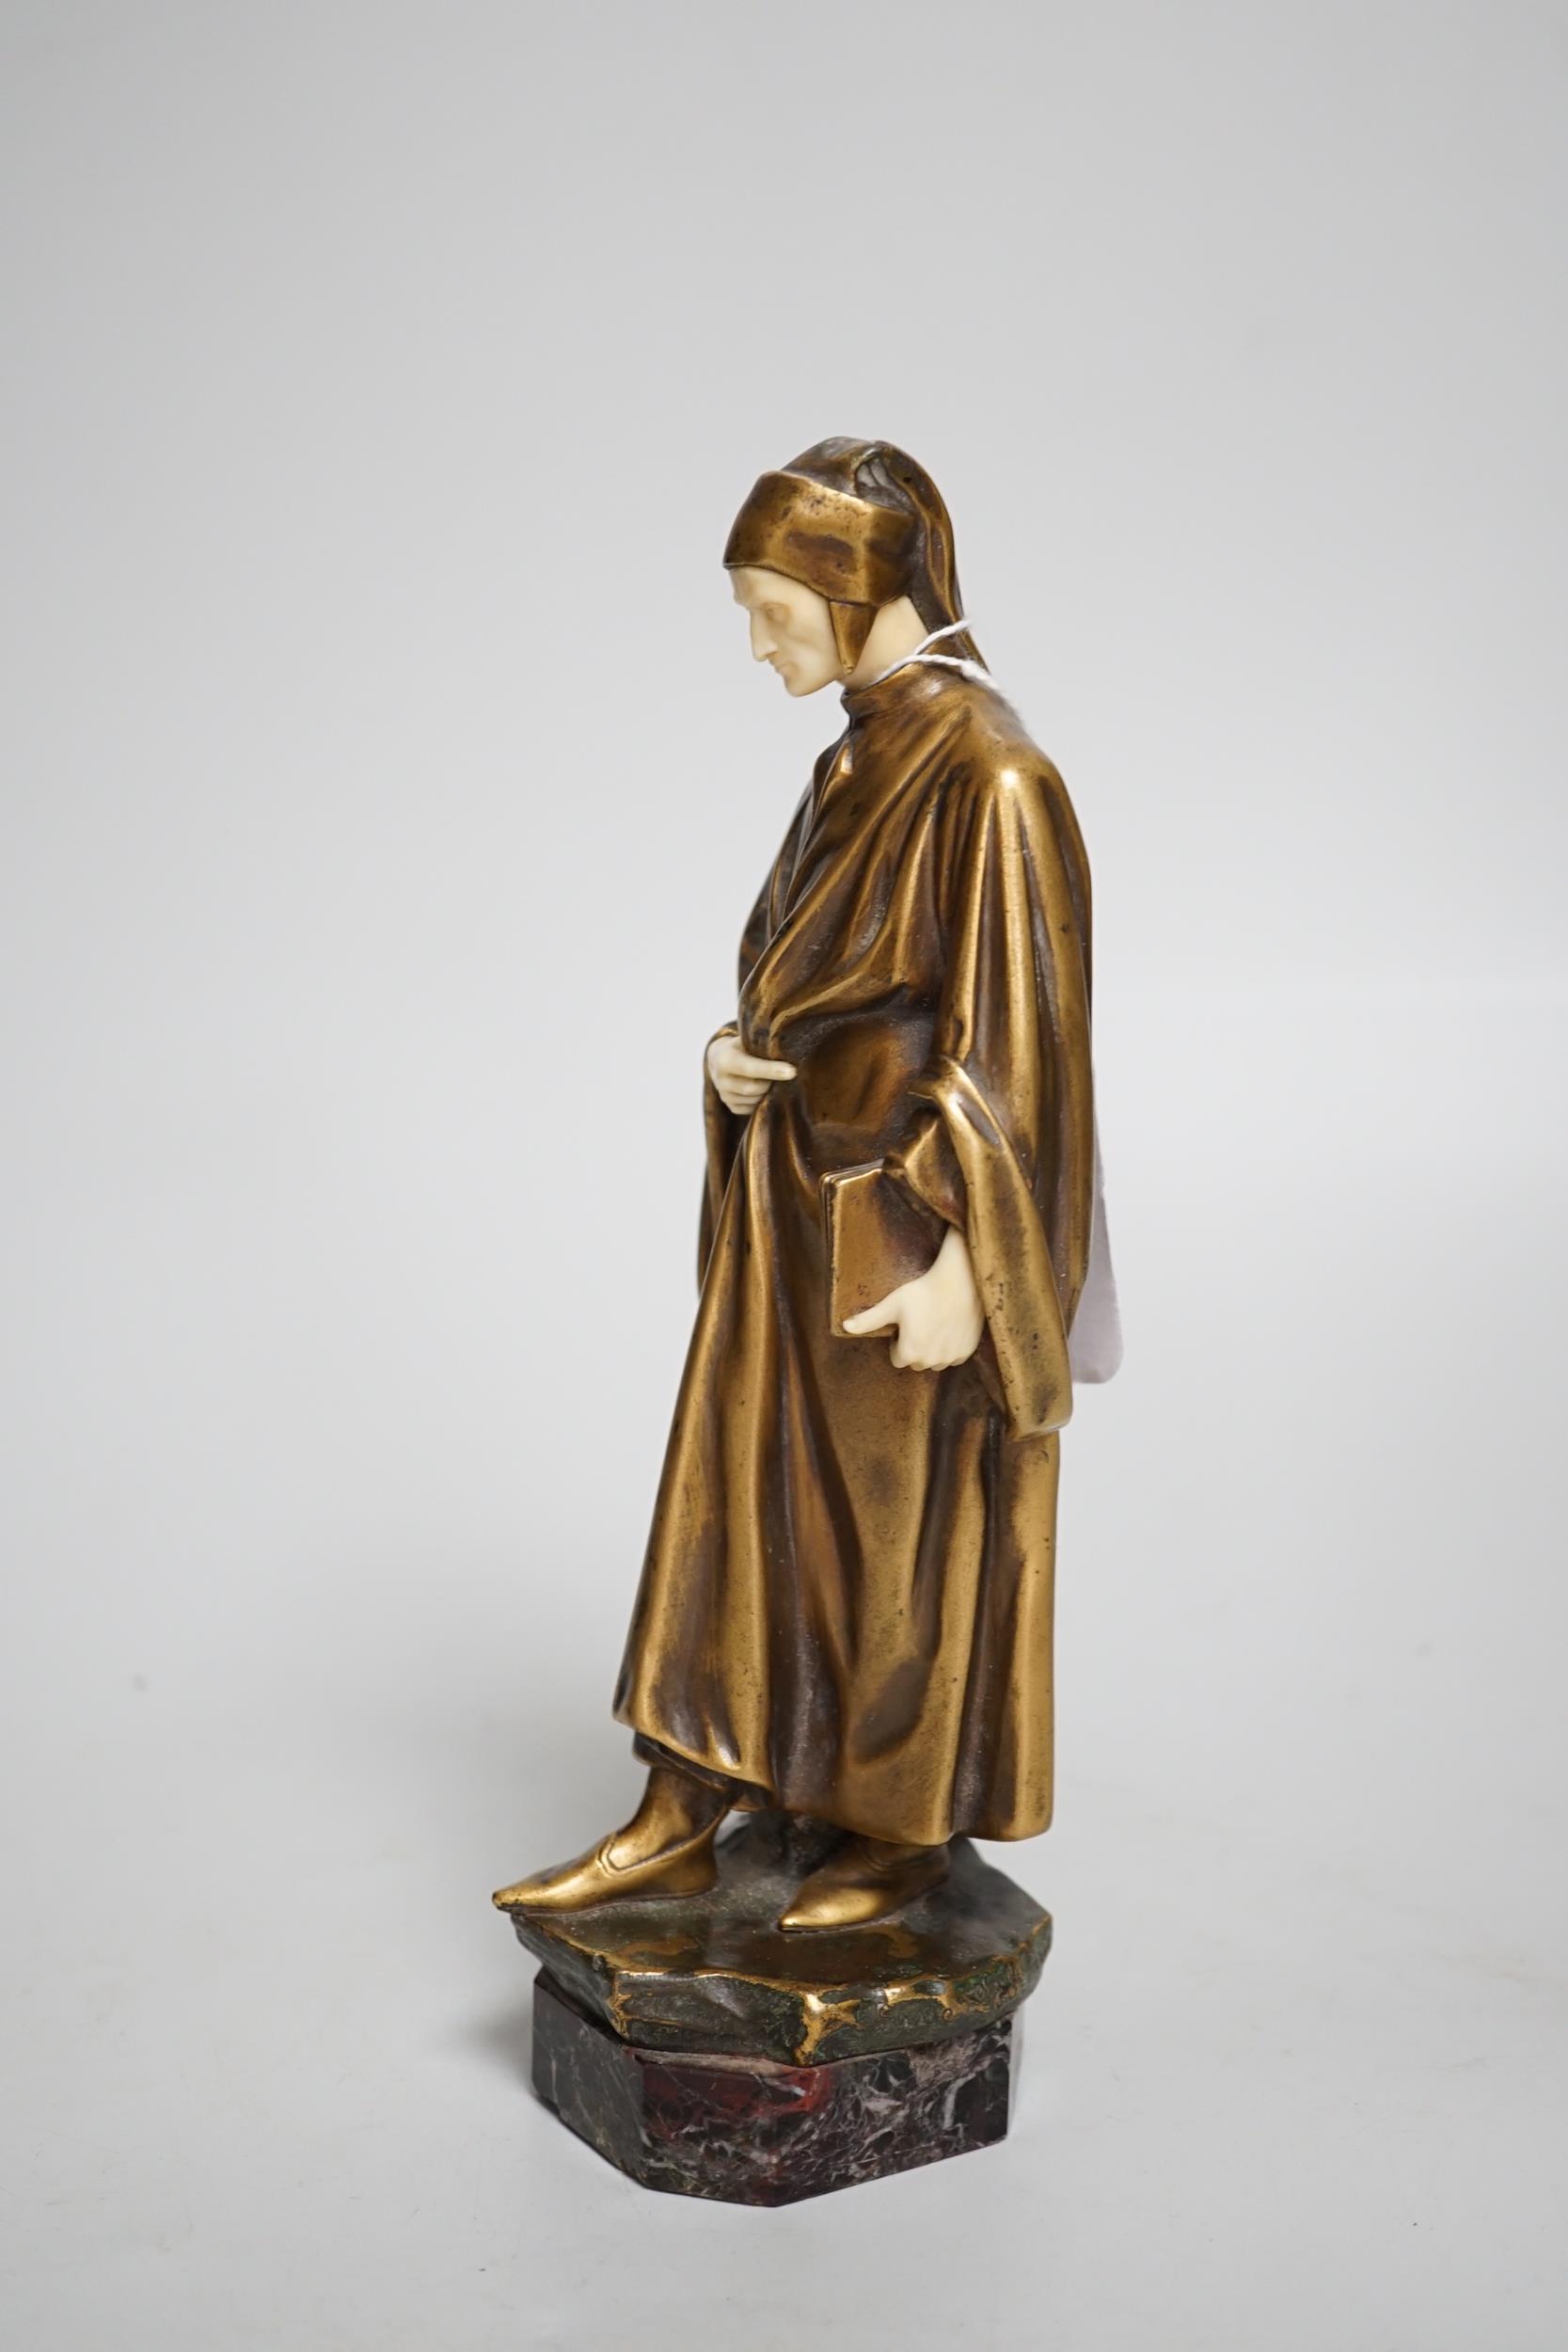 A. Faguelle. A bronze and ivory figure of Dante, c.1900, foundry Susse Frere Ed. Paris, 21cm high. - Image 4 of 5